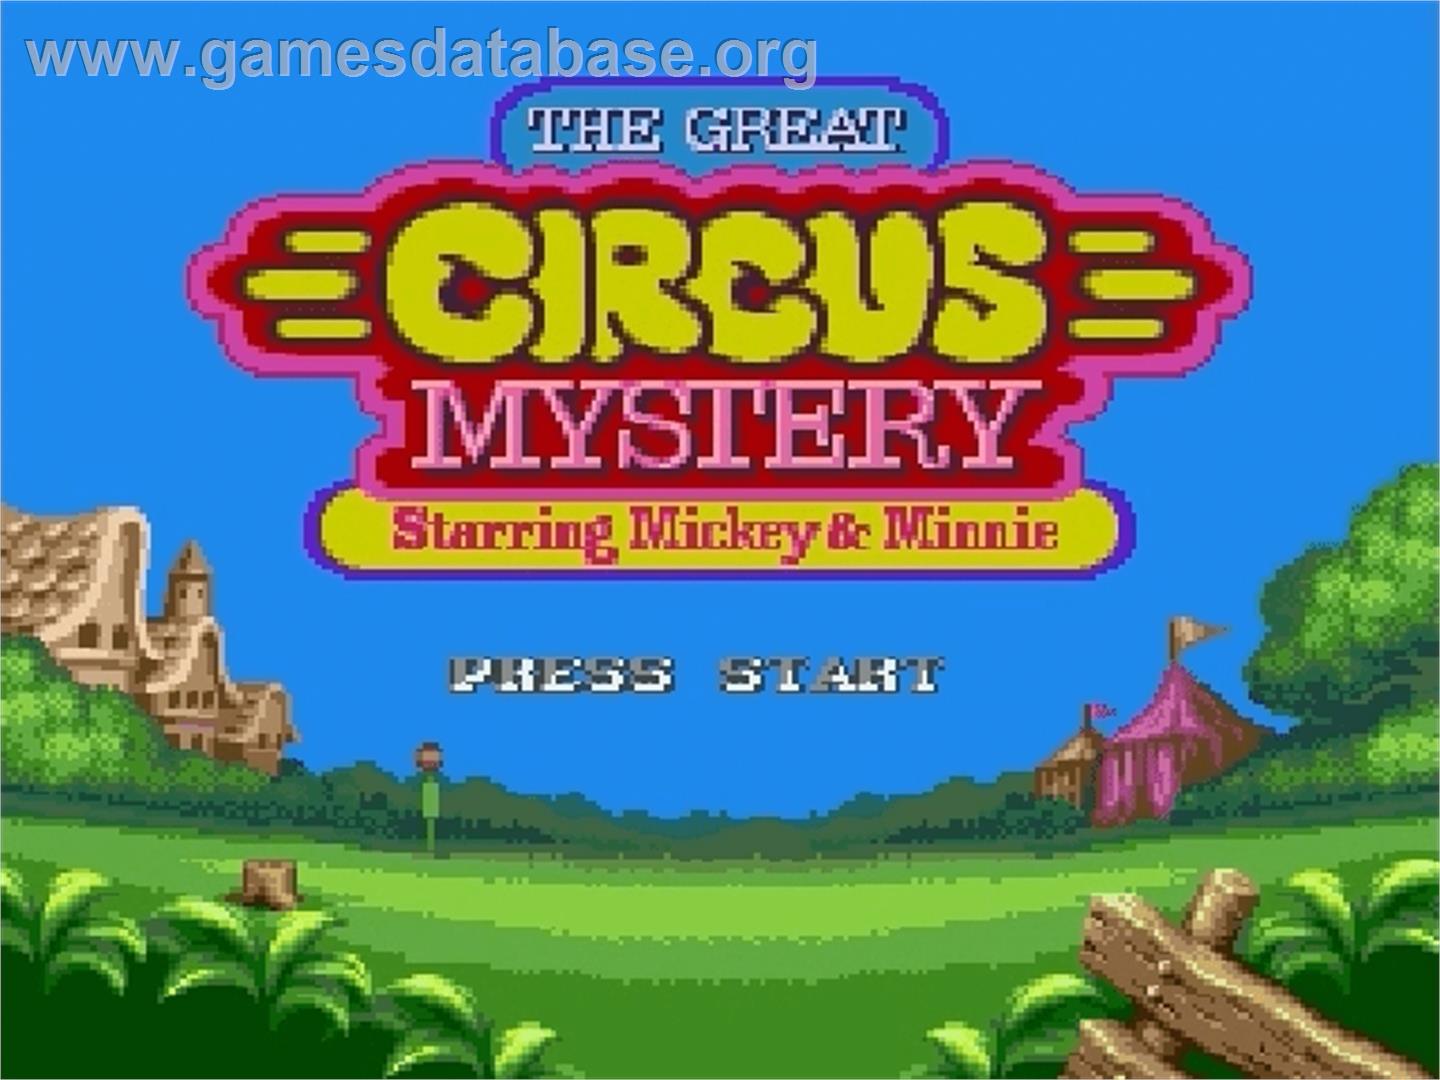 Great Circus Mystery, The - starring Mickey and Minnie Mouse - Sega Genesis - Artwork - Title Screen